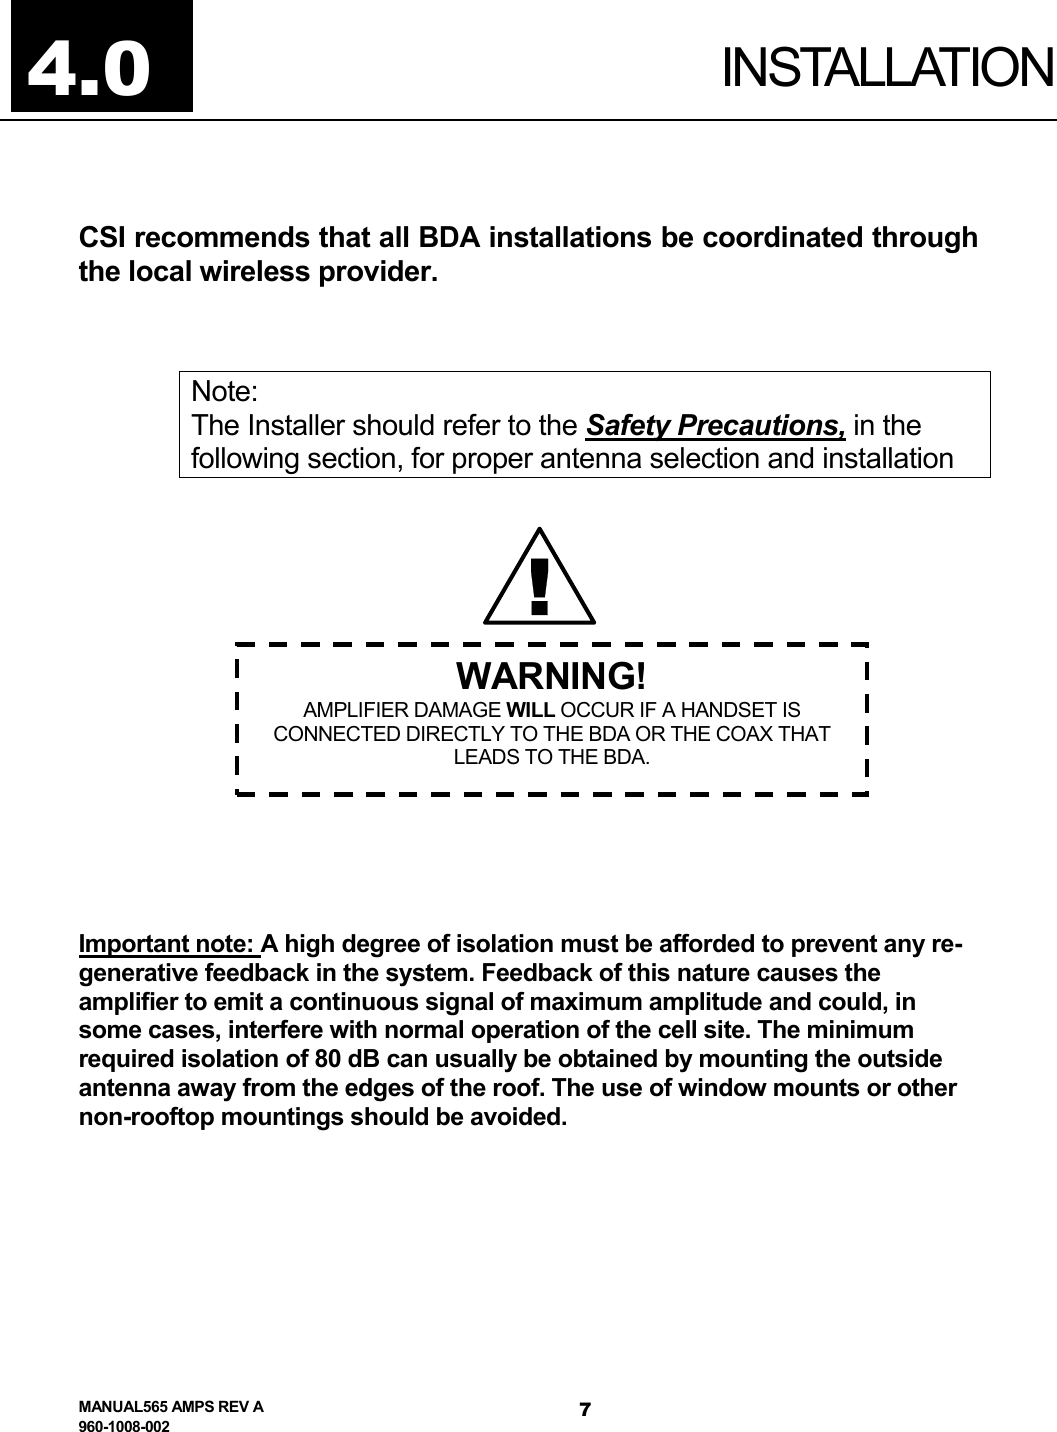  4.0  INSTALLATION CSI recommends that all BDA installations be coordinated through the local wireless provider.  Note: The Installer should refer to the Safety Precautions, in the following section, for proper antenna selection and installation   !WARNING! AMPLIFIER DAMAGE WILL OCCUR IF A HANDSET IS CONNECTED DIRECTLY TO THE BDA OR THE COAX THAT LEADS TO THE BDA.           Important note: A high degree of isolation must be afforded to prevent any re-generative feedback in the system. Feedback of this nature causes the amplifier to emit a continuous signal of maximum amplitude and could, in some cases, interfere with normal operation of the cell site. The minimum required isolation of 80 dB can usually be obtained by mounting the outside antenna away from the edges of the roof. The use of window mounts or other non-rooftop mountings should be avoided.   MANUAL565 AMPS REV A 960-1008-002 7